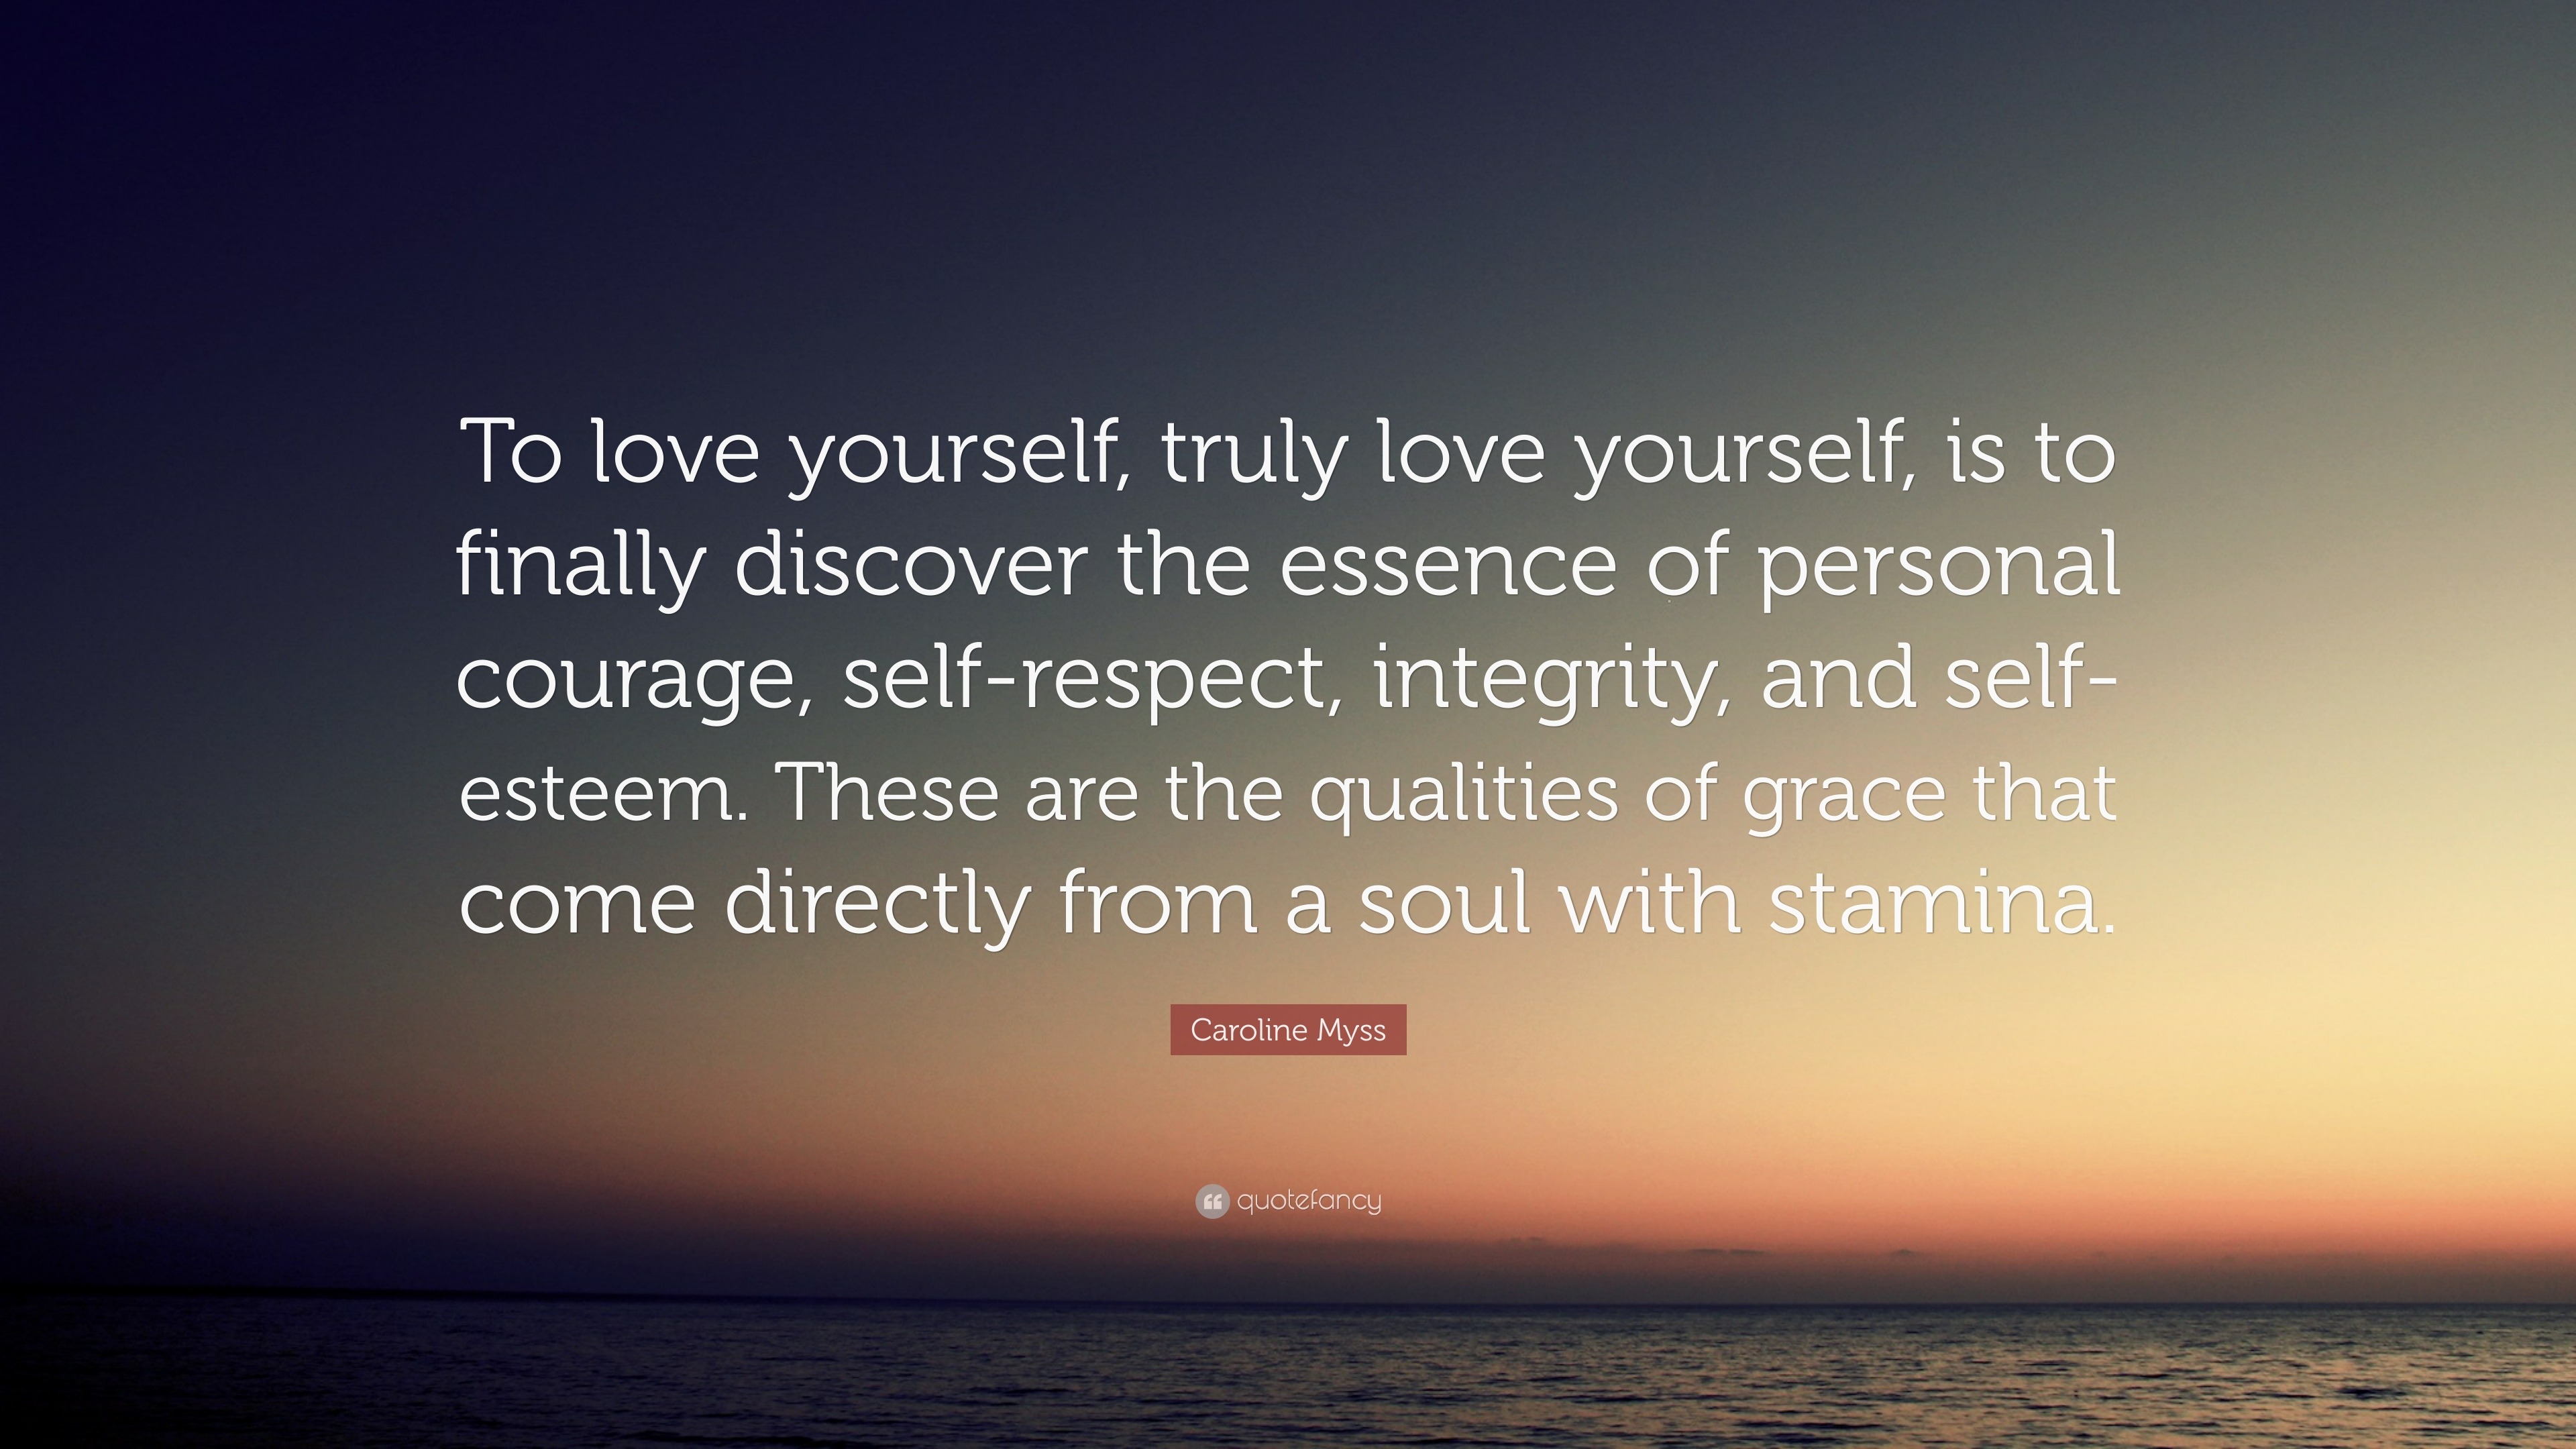 Self Esteem Quotes “To love yourself truly love yourself is to finally